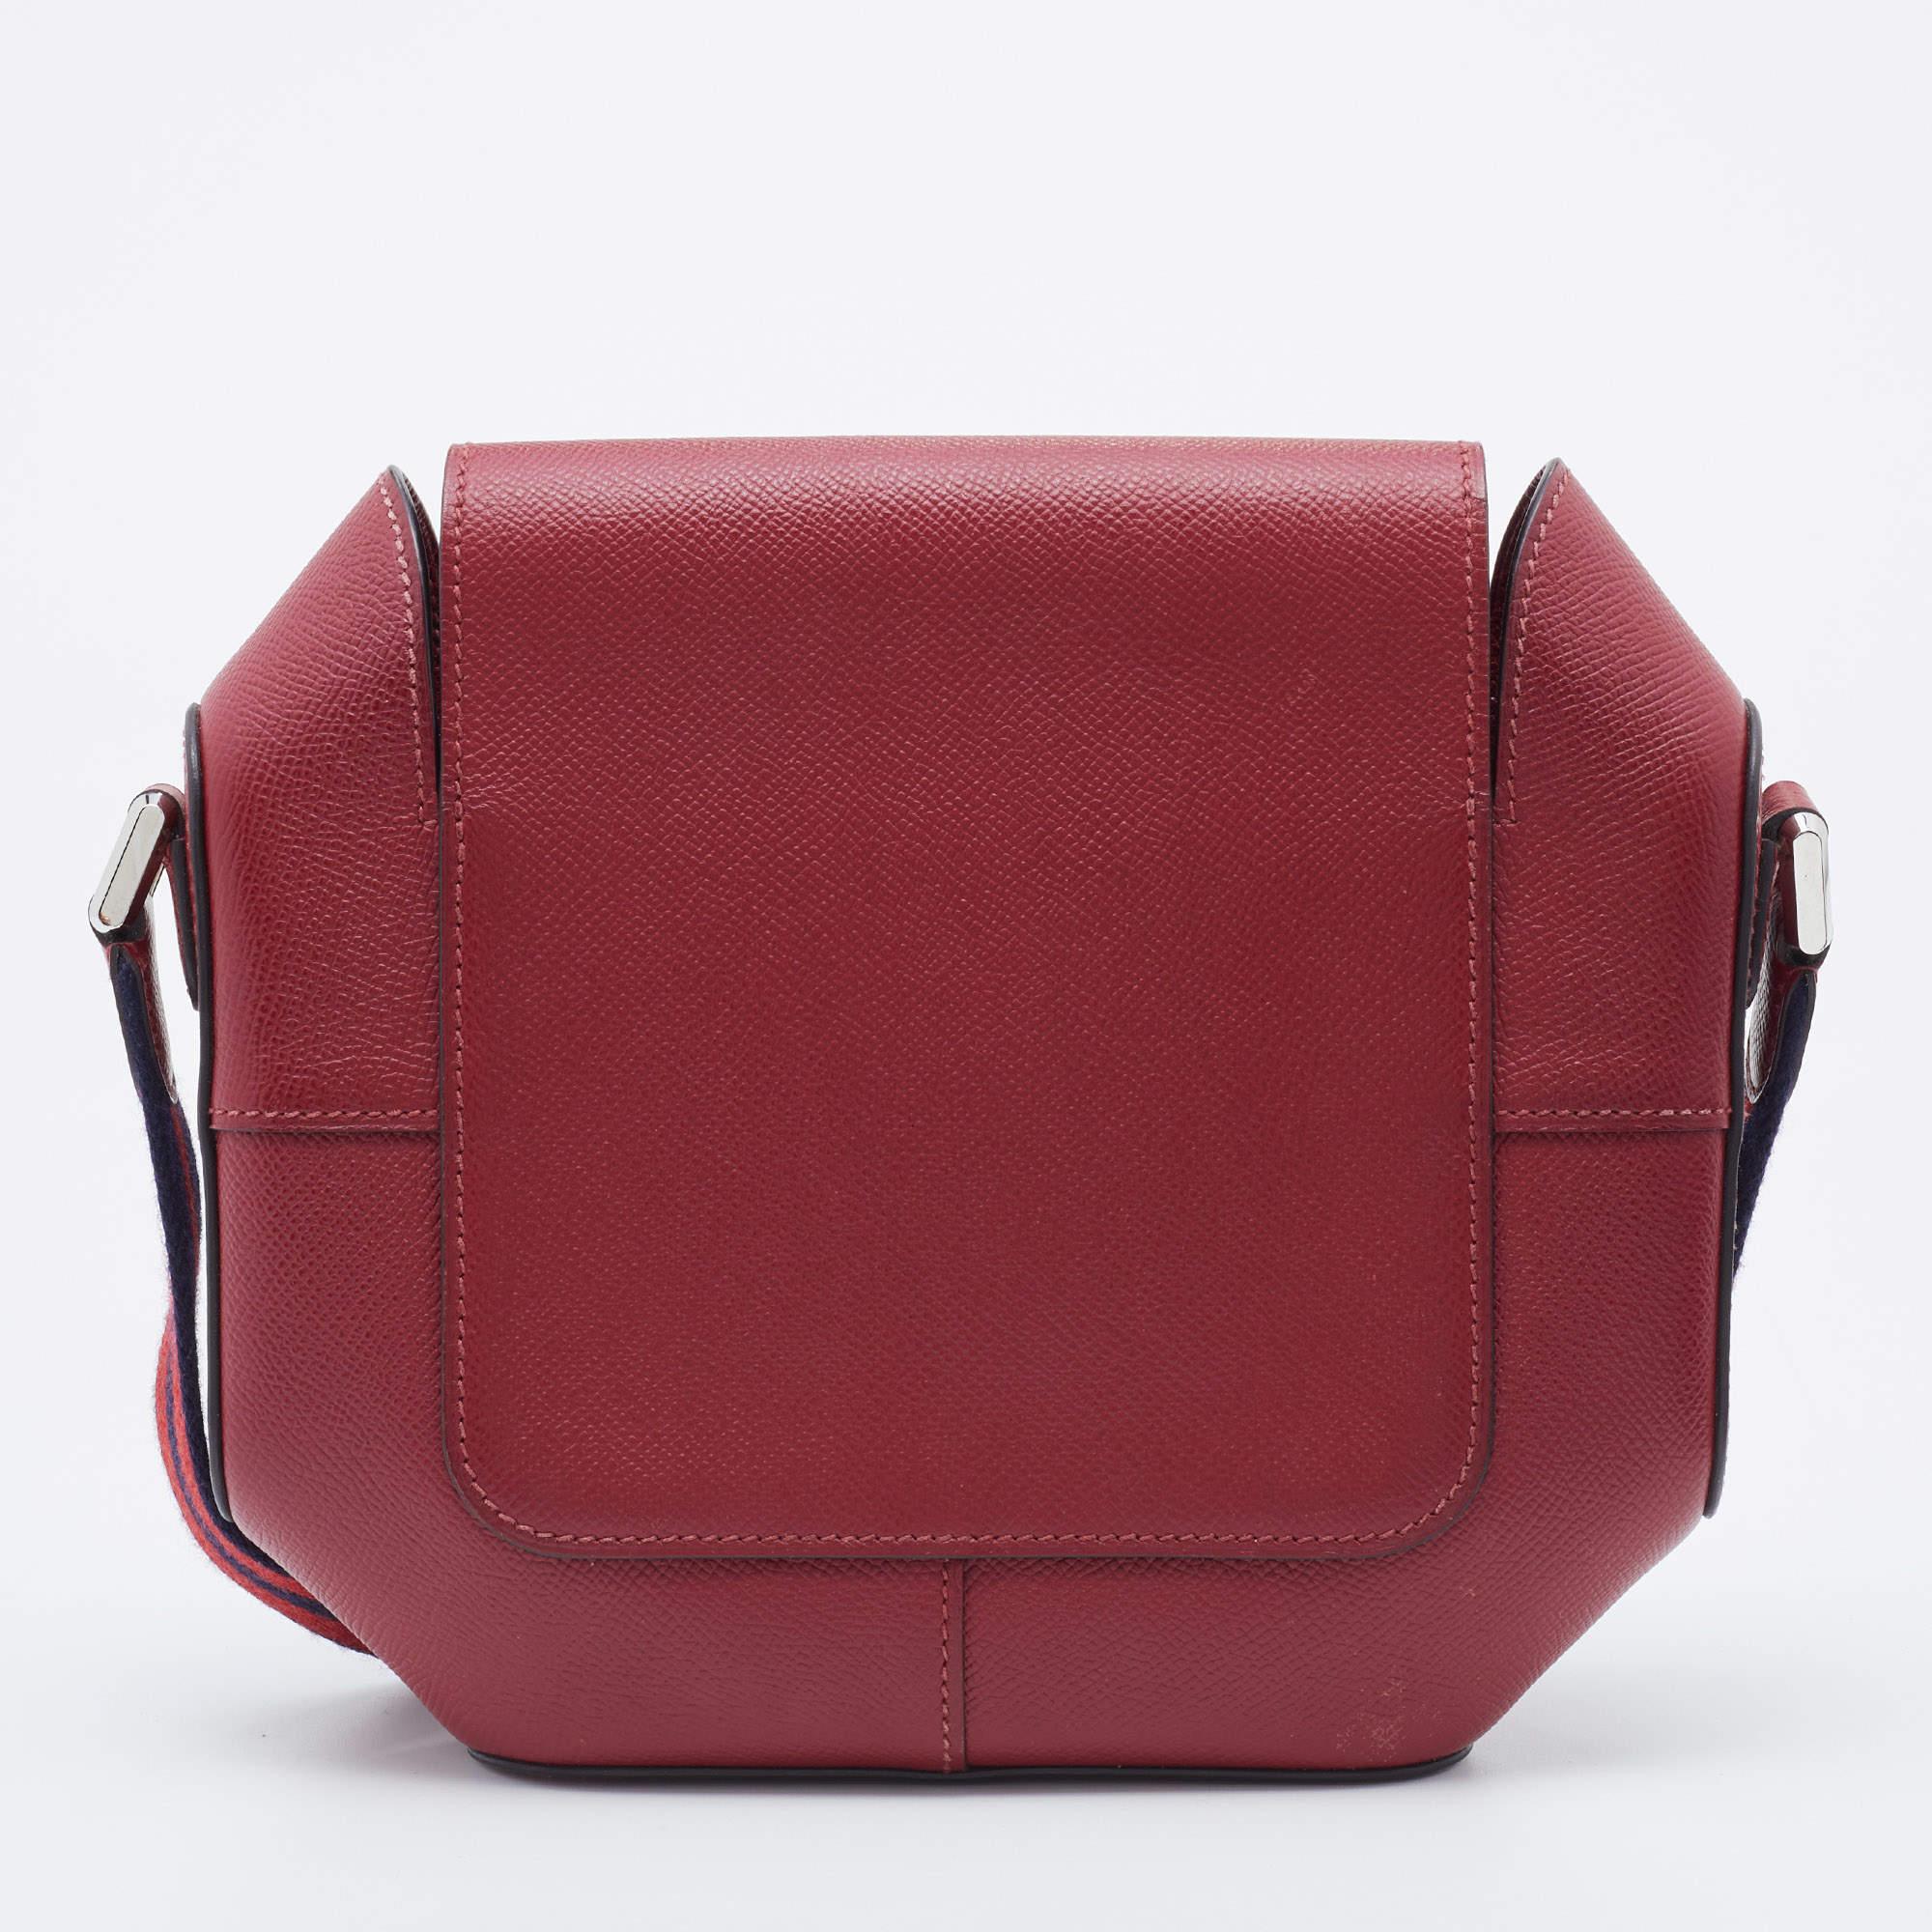 The Hermes Octogone bag appeals to one and all in a delighting way with its geometric structure. Crafted from Rouge H Epsom leather, the compact bag has a unique flap design, tonal stitching, and a leather-lined interior for your essentials. An